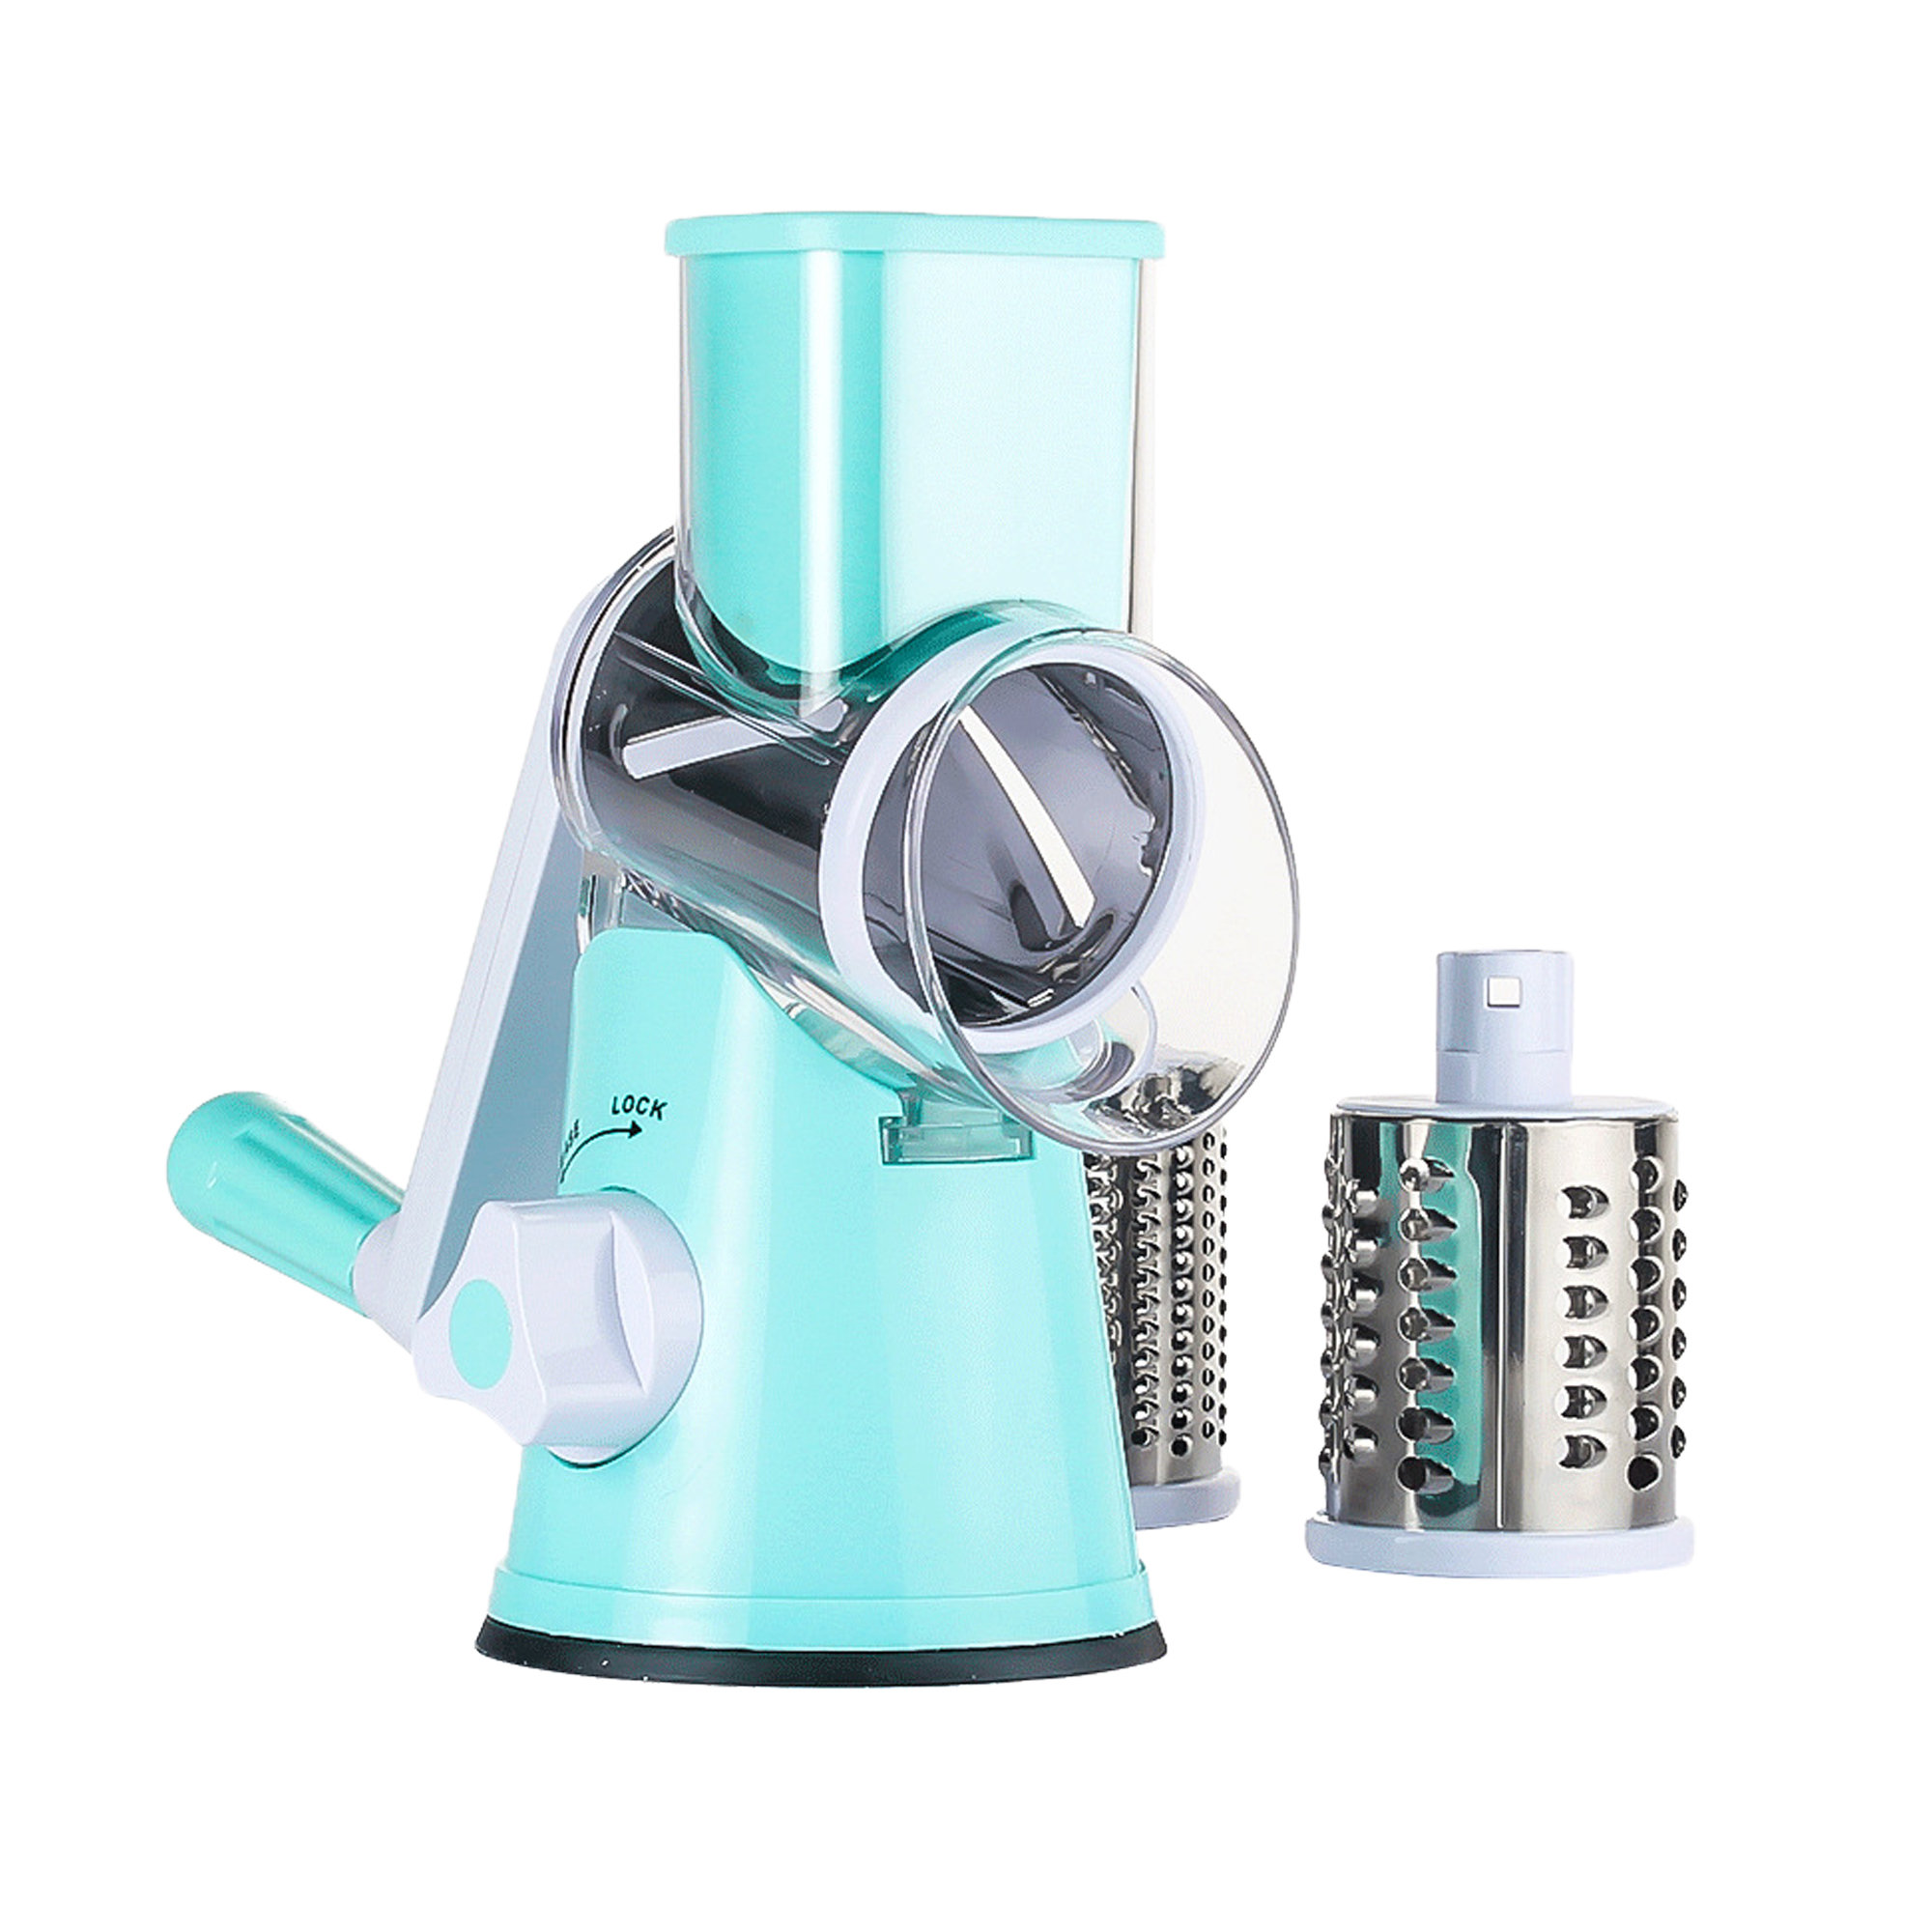 Multi functional kitchen rotary nut & cheese grater vegetable